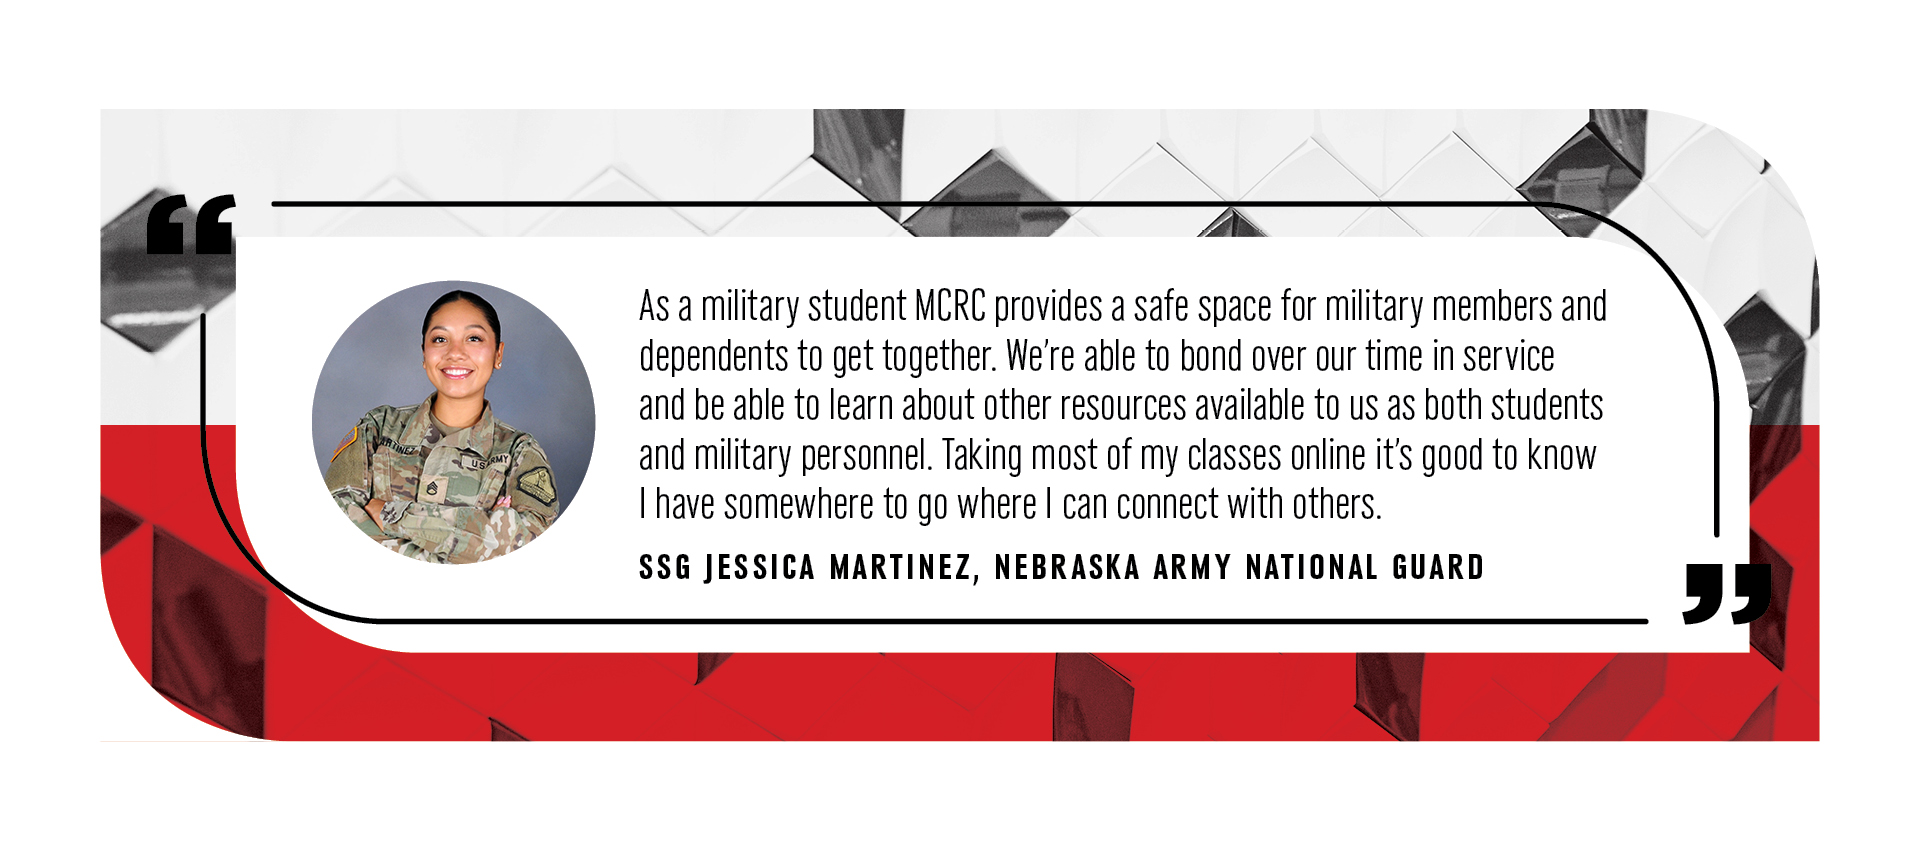 As a military student MCRC provides a safe space for military members and dependents to get together. We’re able to bond over our time in service and be able to learn about other resources available to us as both students and military personnel. Taking most of my classes online it’s good to know I have somewhere to go where I can connect with others. -SSG Jessica Martinez, Nebraska Army National Guard